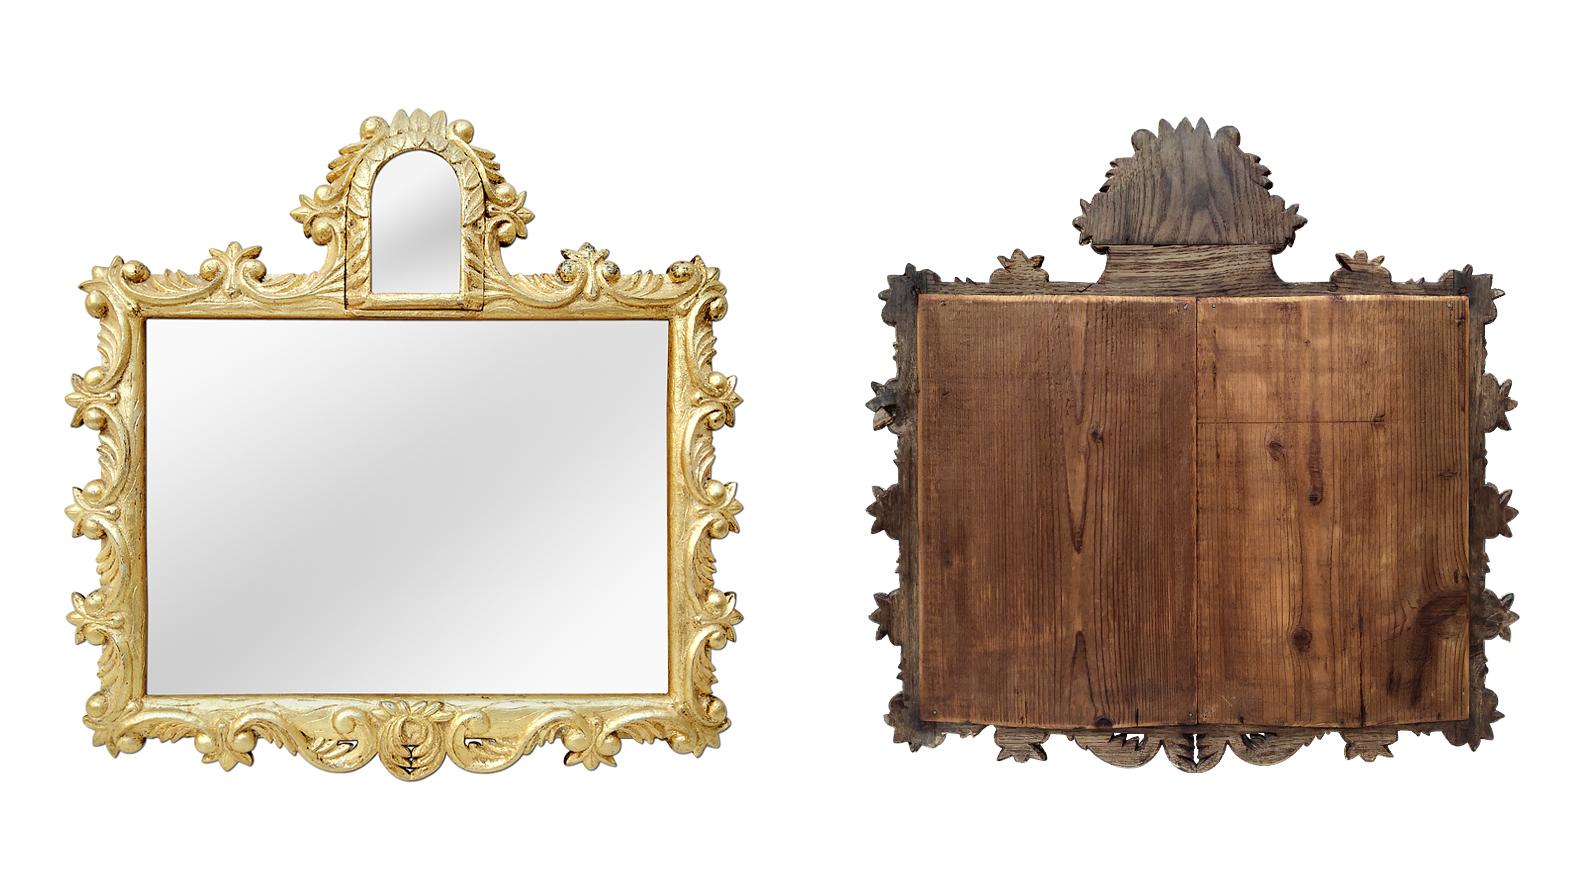 Antique French Giltwood Mirror, Rococo Style, circa 1930 For Sale 3